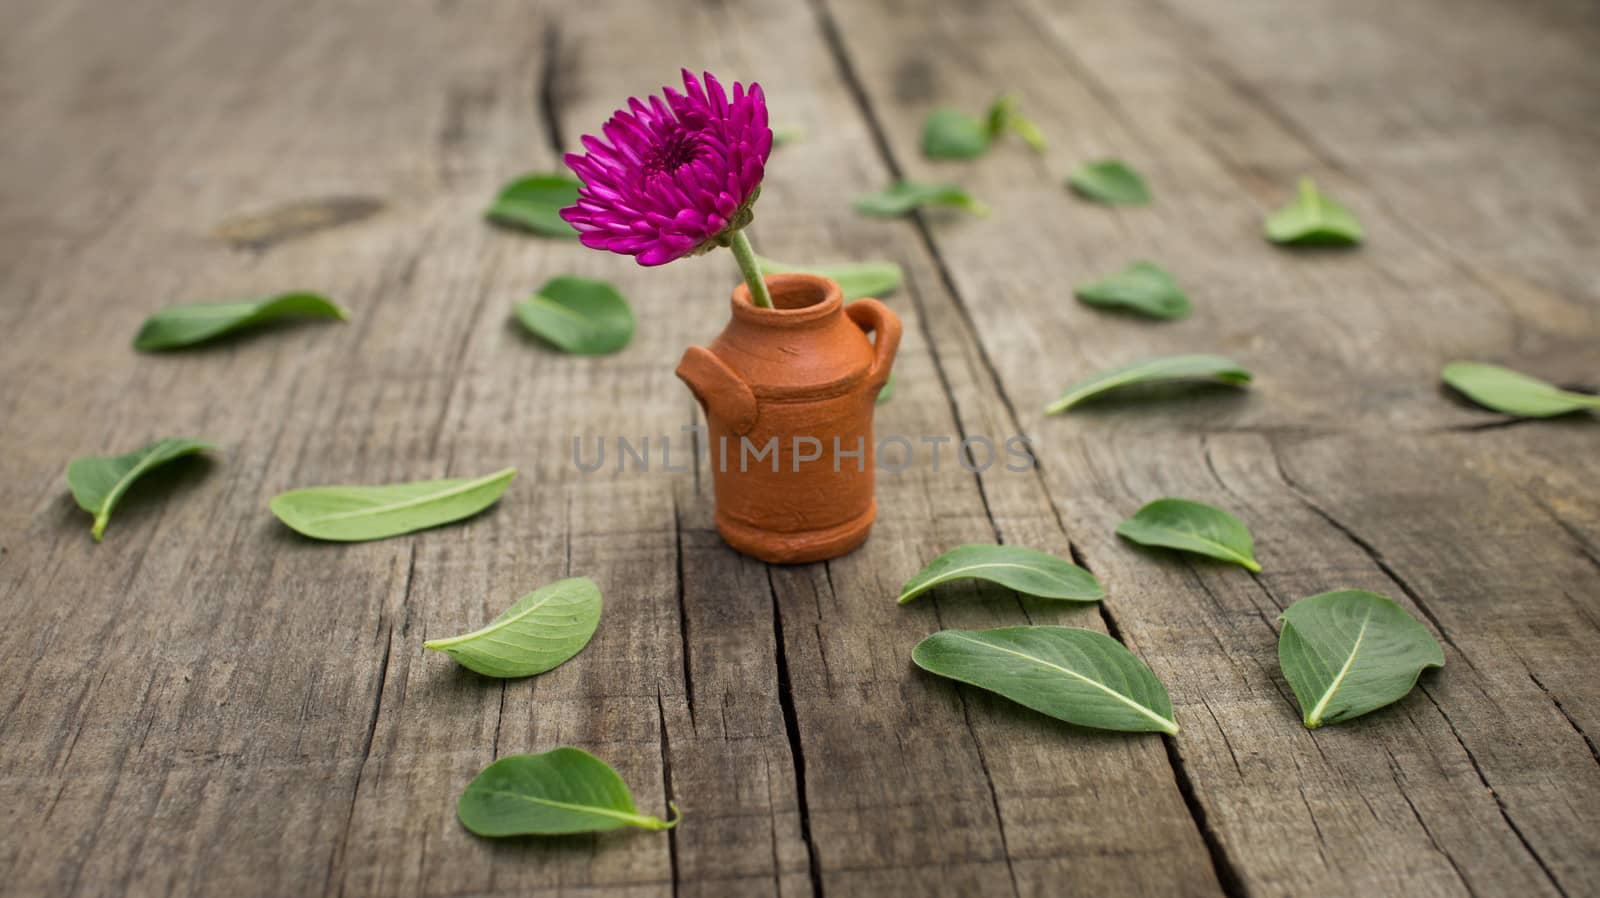 A flower pot with leaves on wooden background.